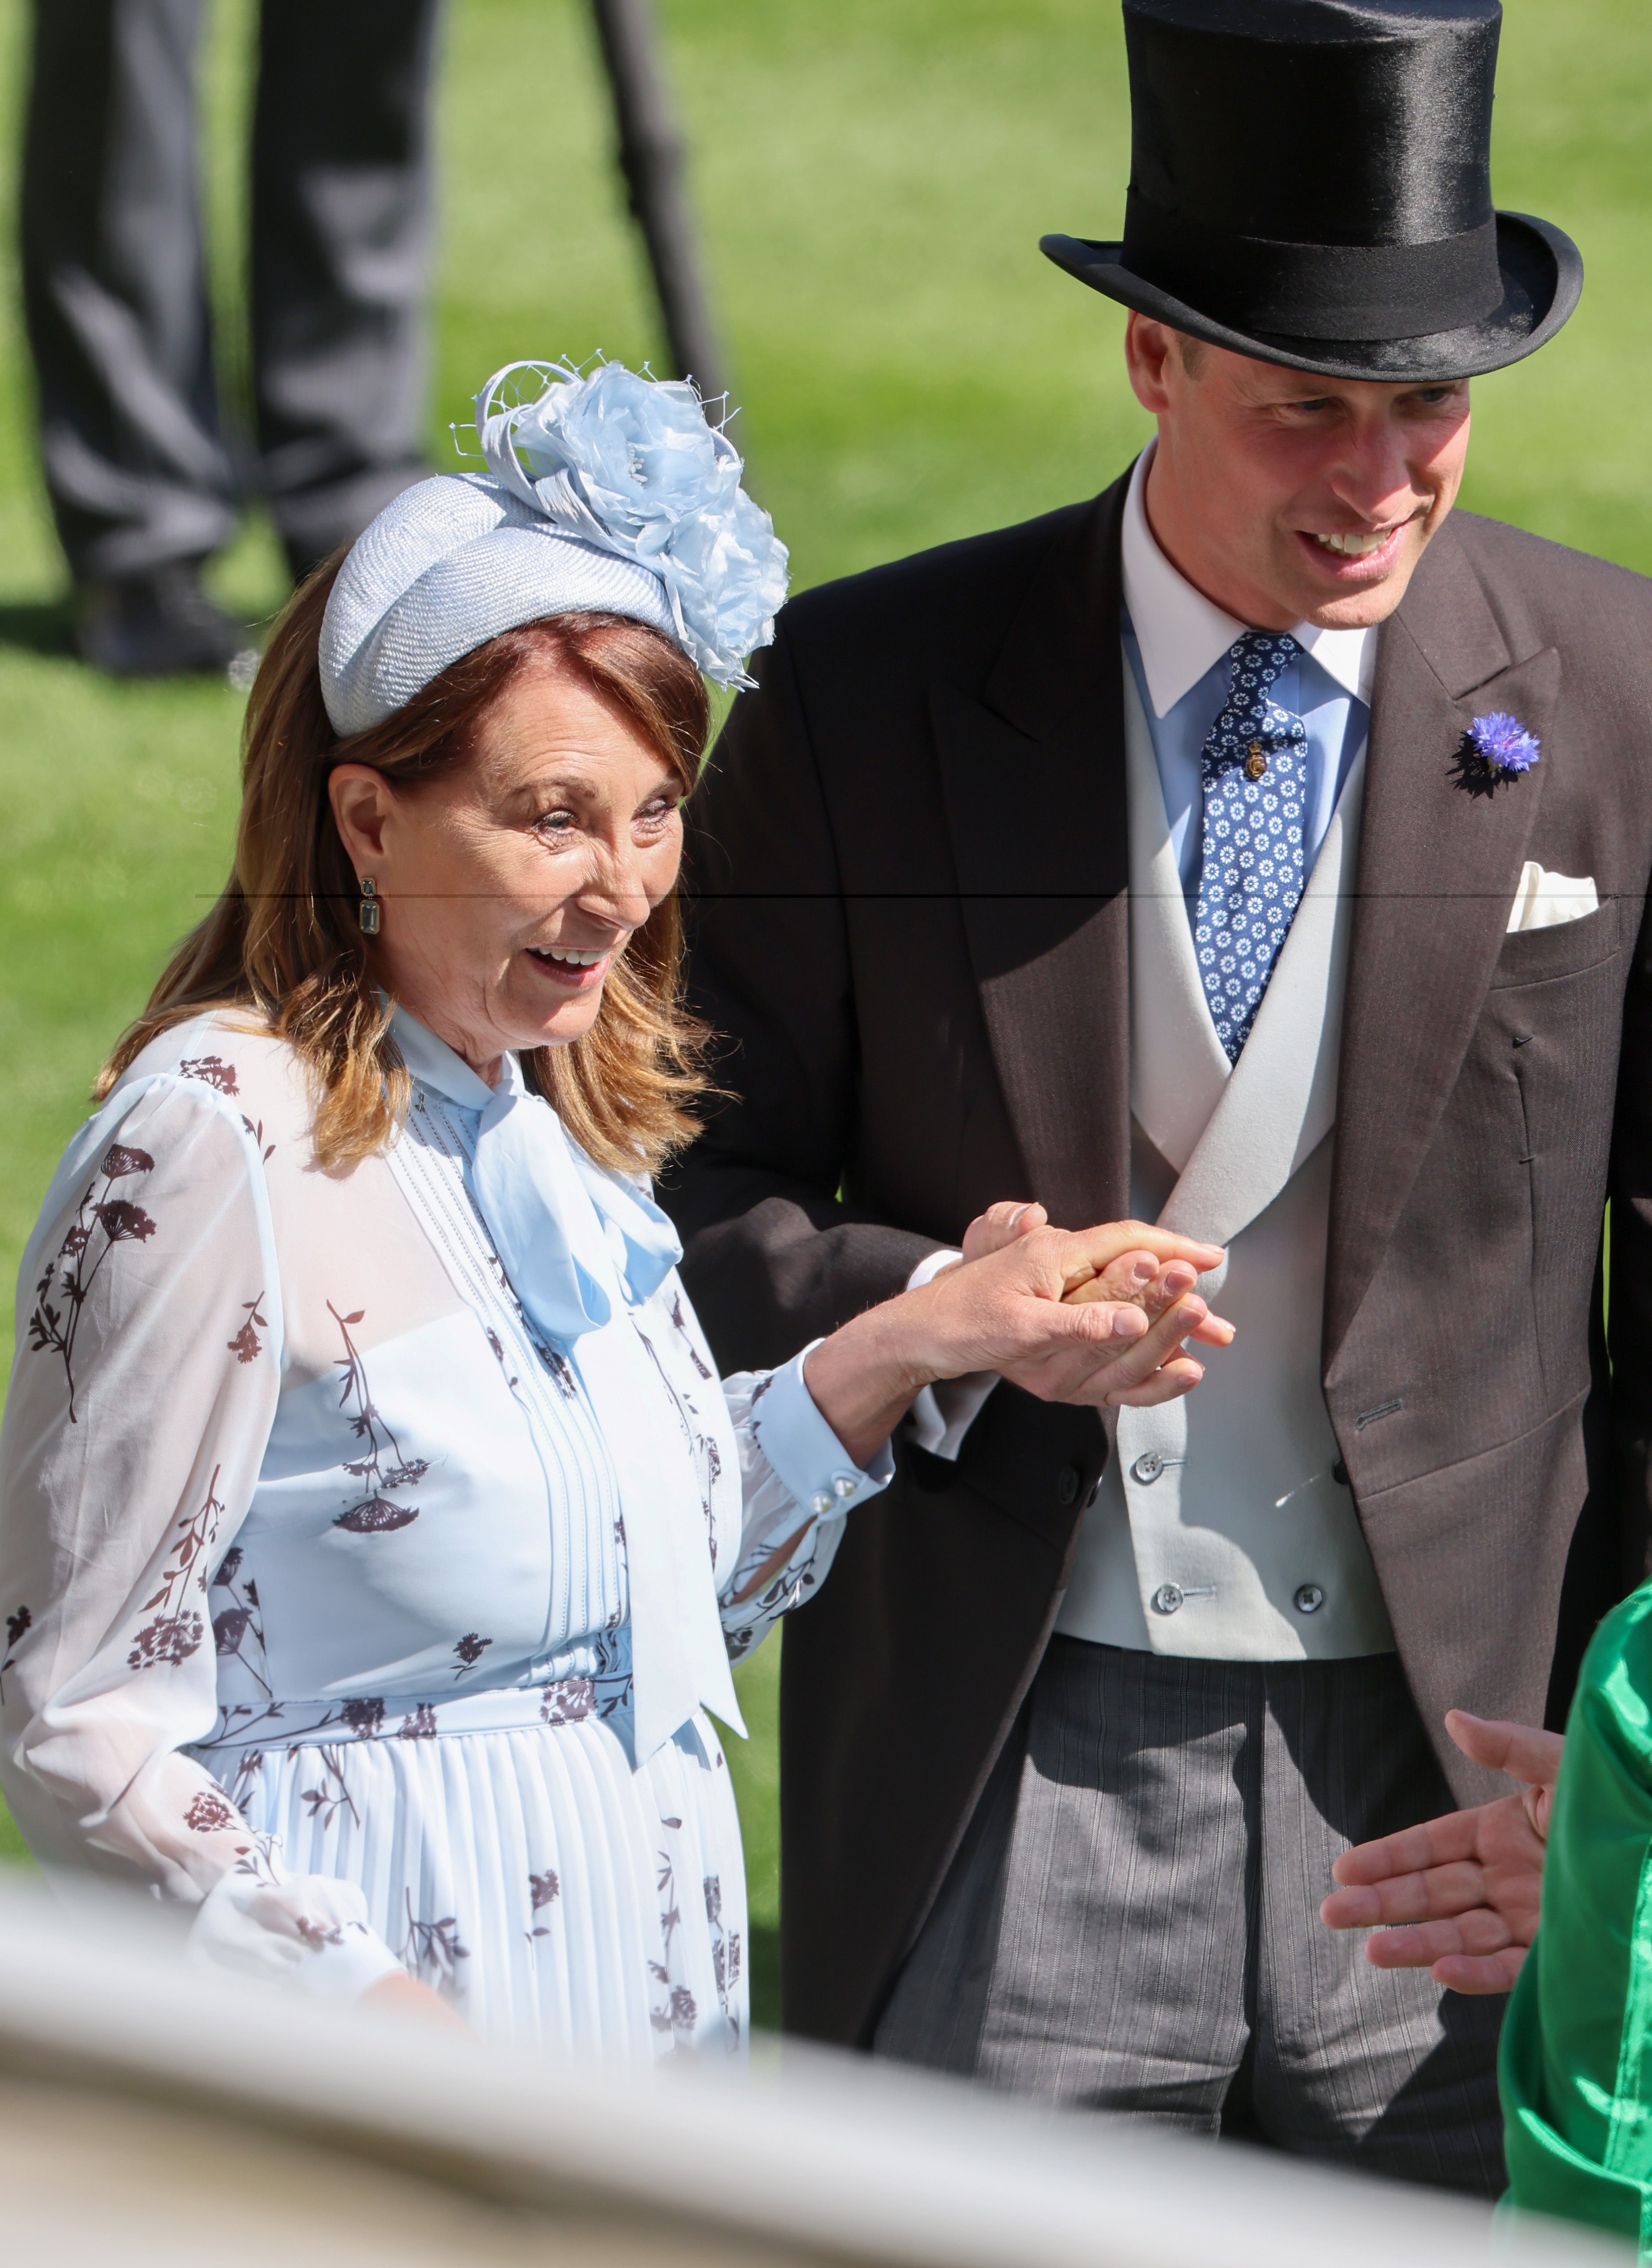 Carole was seen holding William’s hand at one point during Royal Ascot.